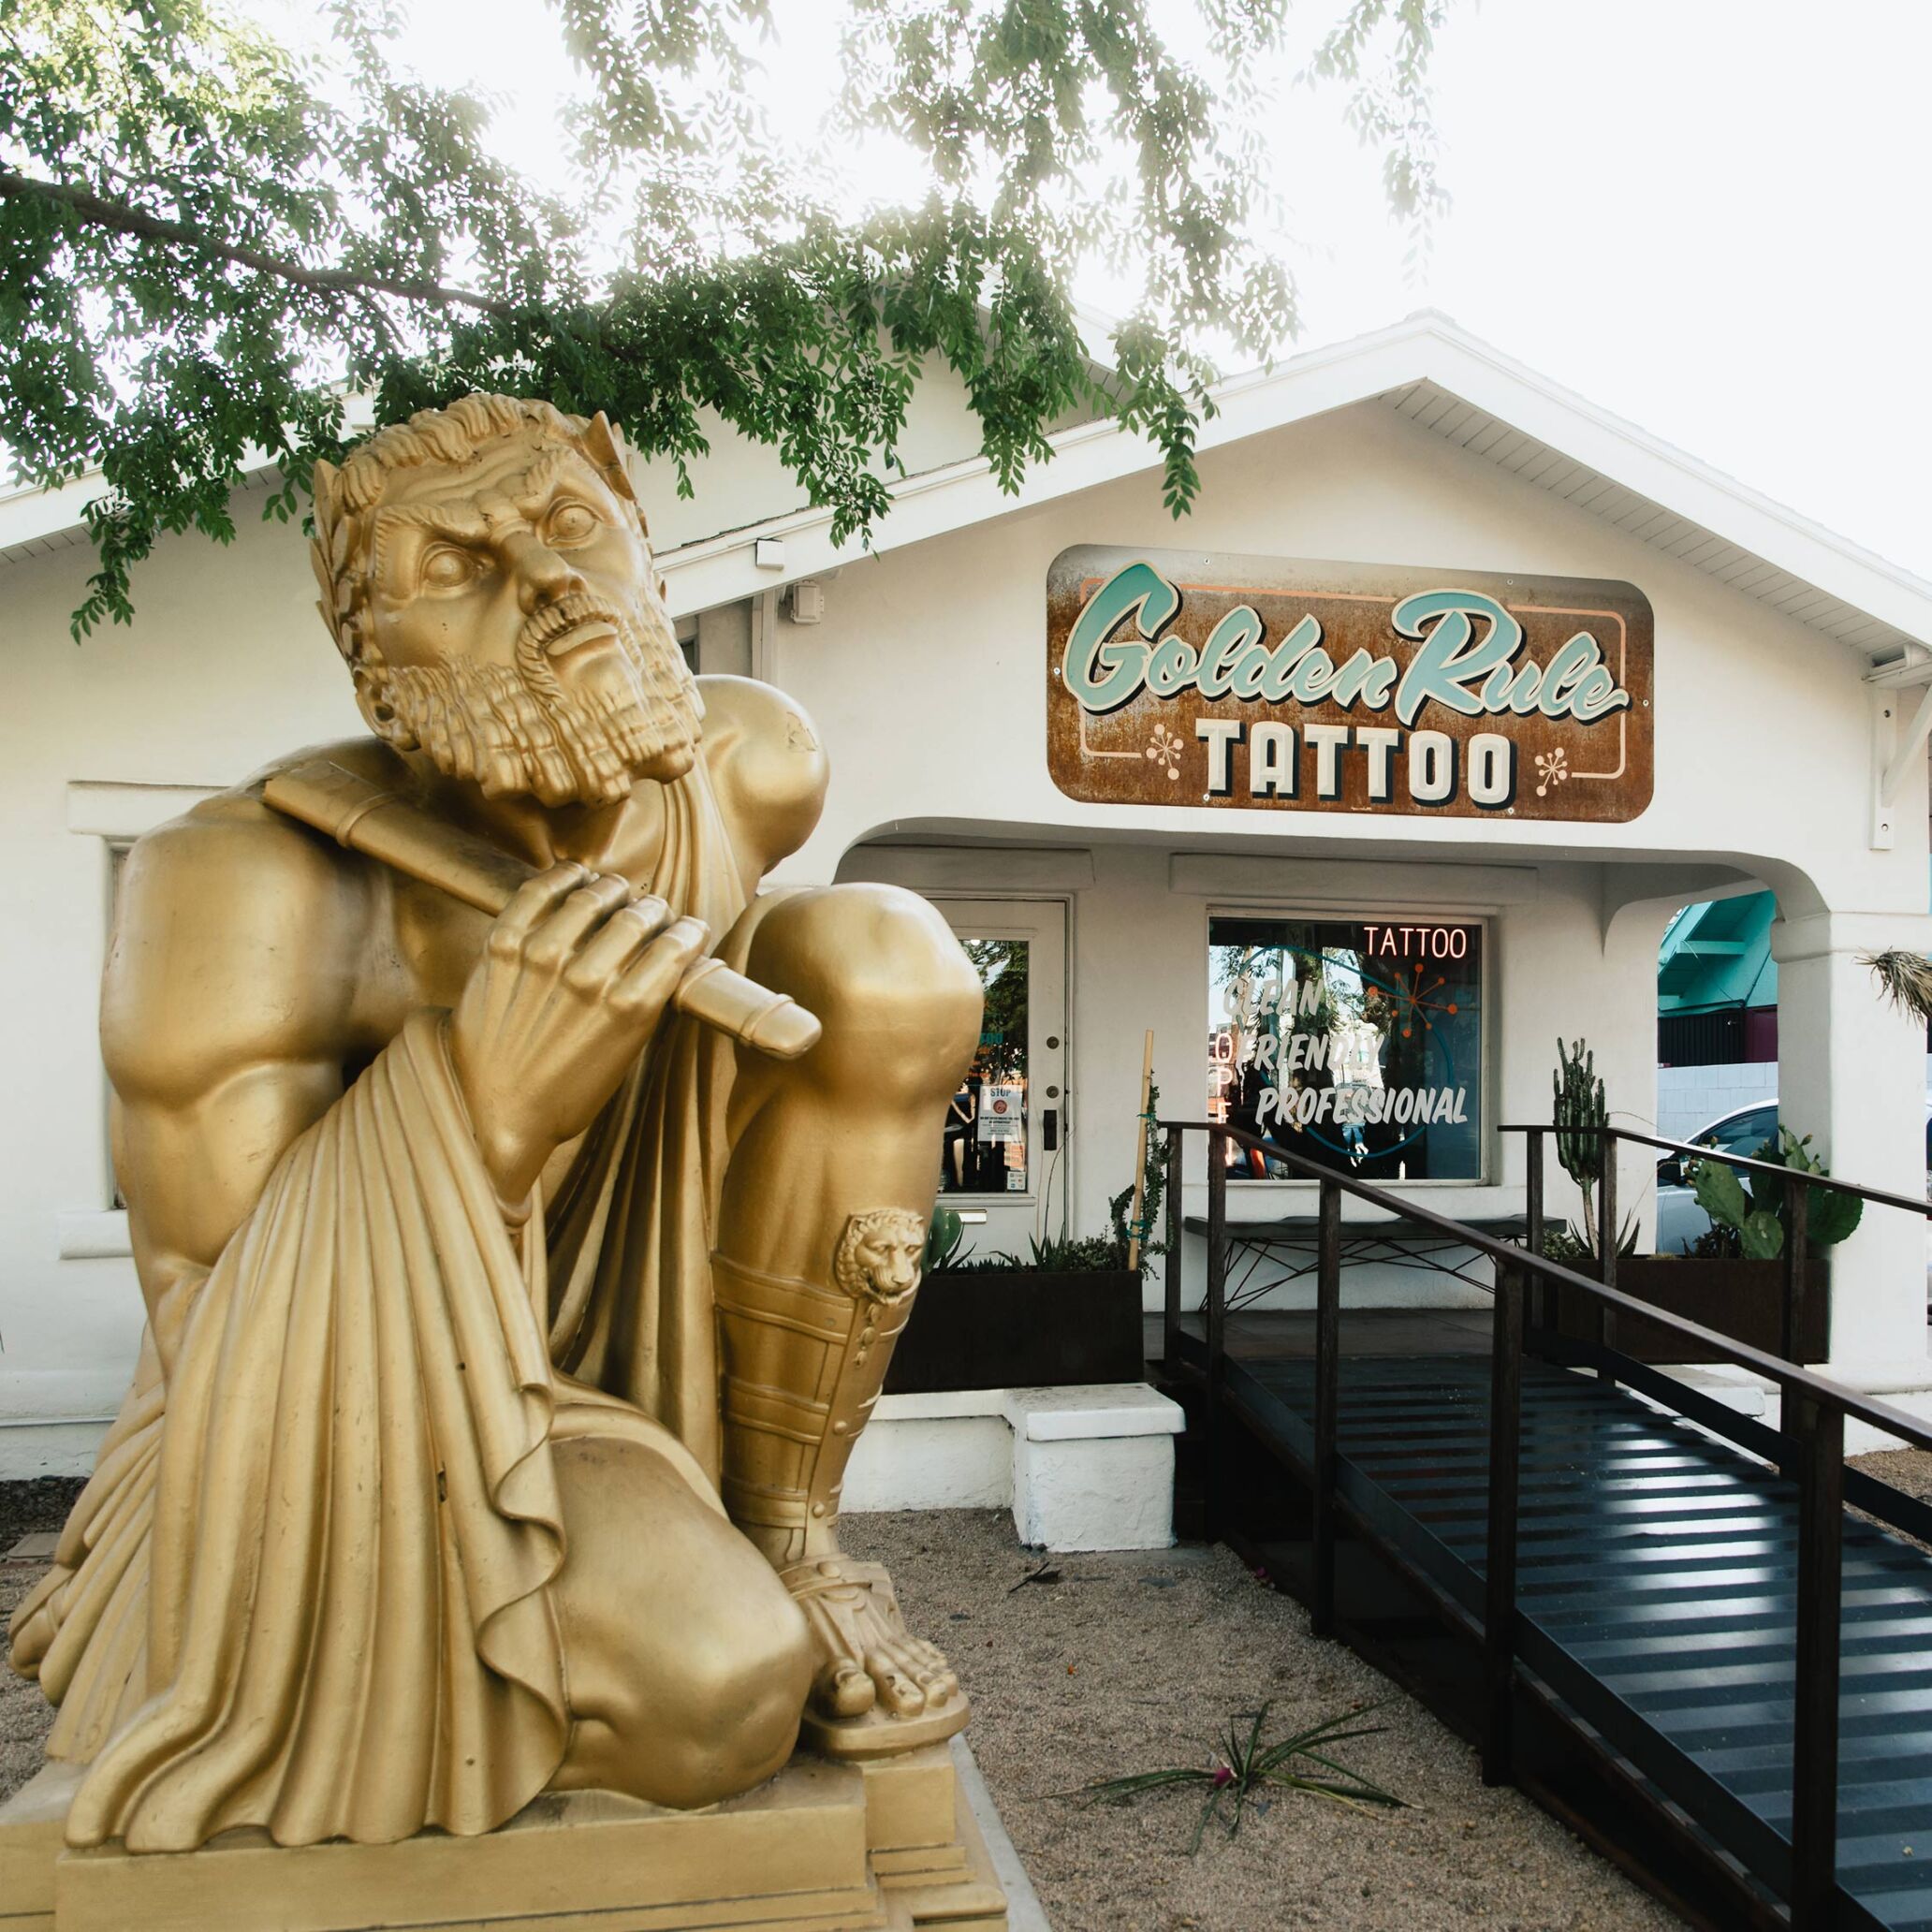 Tattoo Shops to Look Out For in Every State